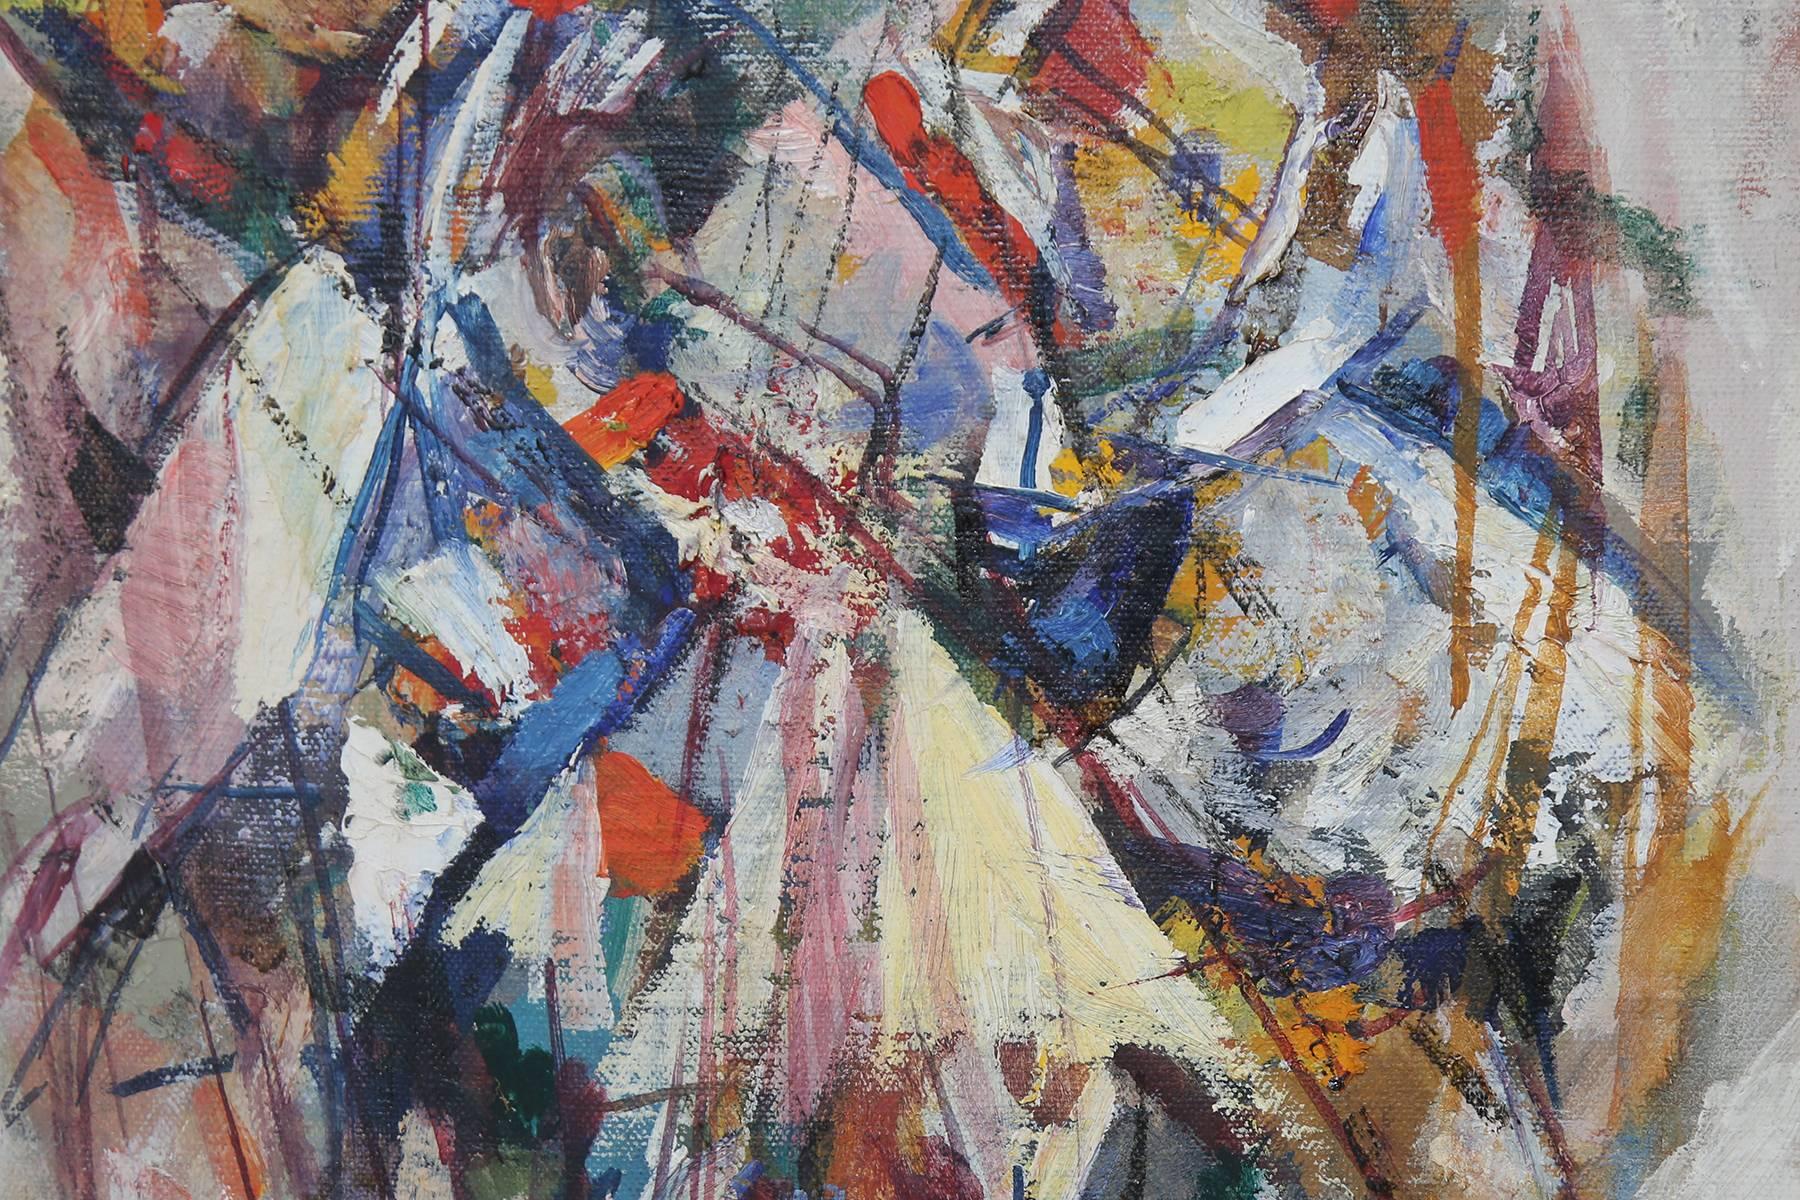 William Meyerowitz abstract oil on board, circa late 1950s. This lovely example seamlessly mixes movement and layering of color. Signed.